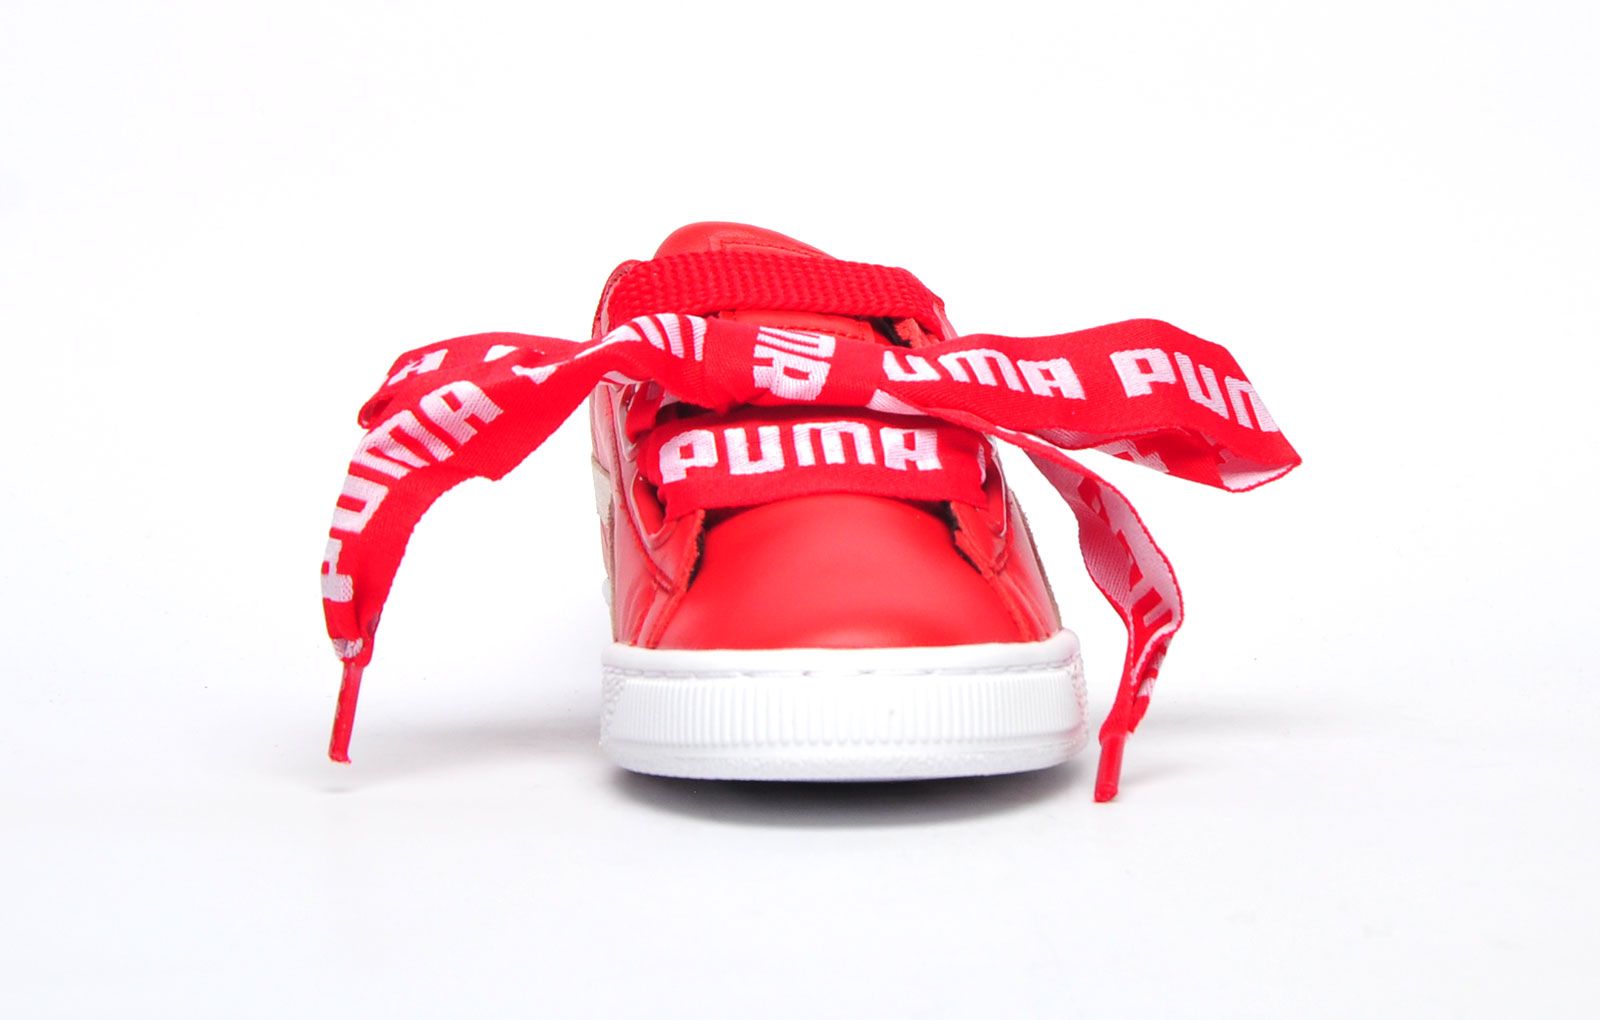 Step out in style with these premium Basket Heart womens trainers from Puma. A modern sleek silhouette crafted with premium red leather with iconic suede overlay, these Puma trainers deliver a first-class statement look, for a bang on trend style.
 Delivering five star comfort these womens trainers sport a padded heel and ankle collar. Featuring a unique lace up style proudly displaying the iconic Puma logo for the ultimate finishing touch on these stylish womens trainers.
 -Leather and suede mix upper
 -Vintage styled outsole
 -Padded heel and ankle cushioning
 -Spare laces to change look
 -Unique broad set lace fastening
 -Luxurious inner lining
 -Puma branding throughout